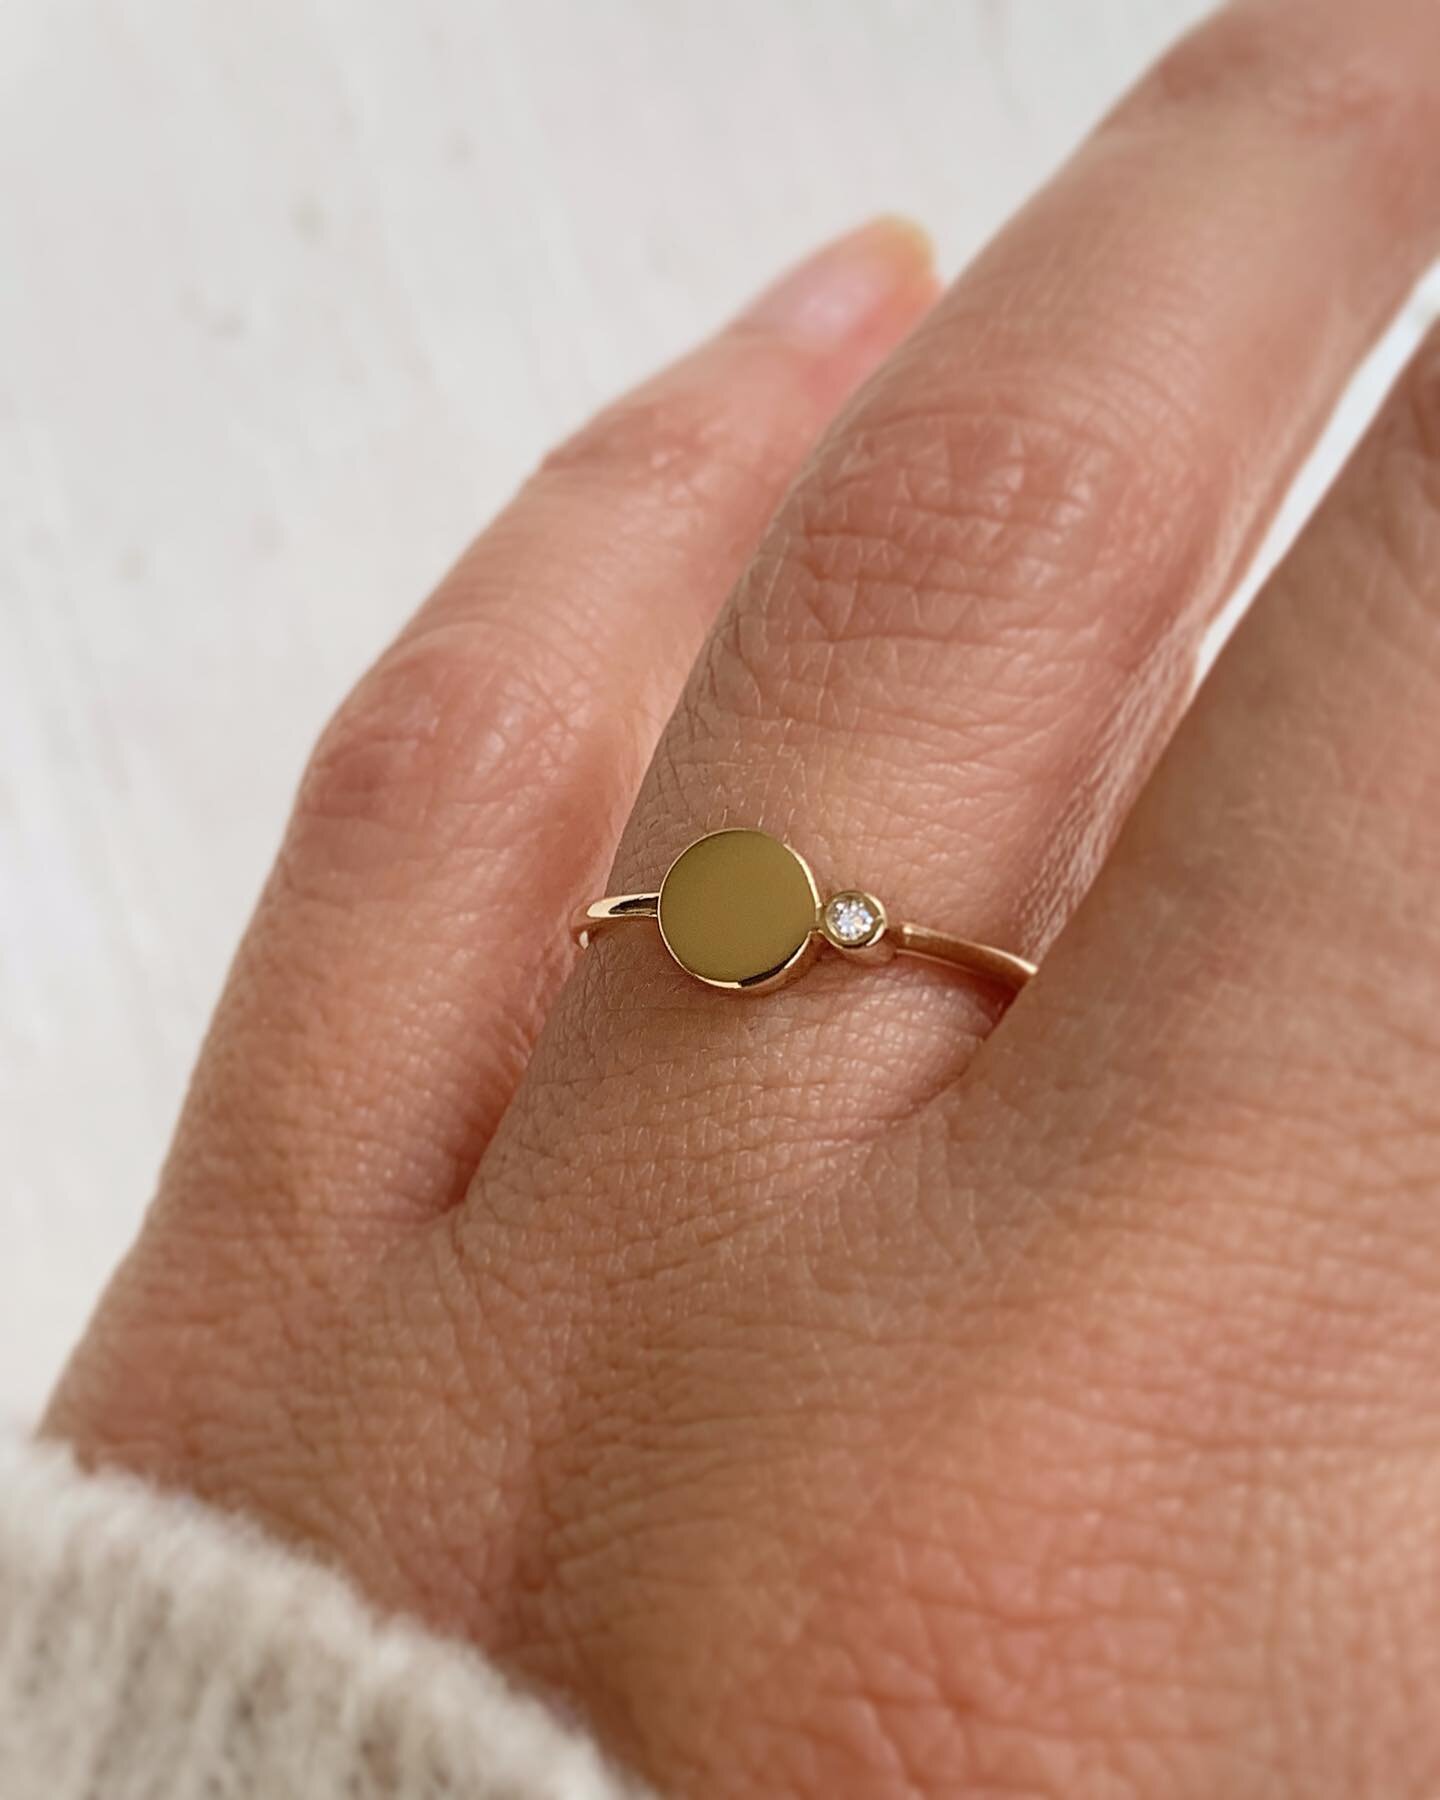 Aura Signet ring ready to ship✨
.
.
.
.
#signet #signetrings #rings #goldrings #solidgold #melbournejewellery #giftsforher #christmasgiftideas